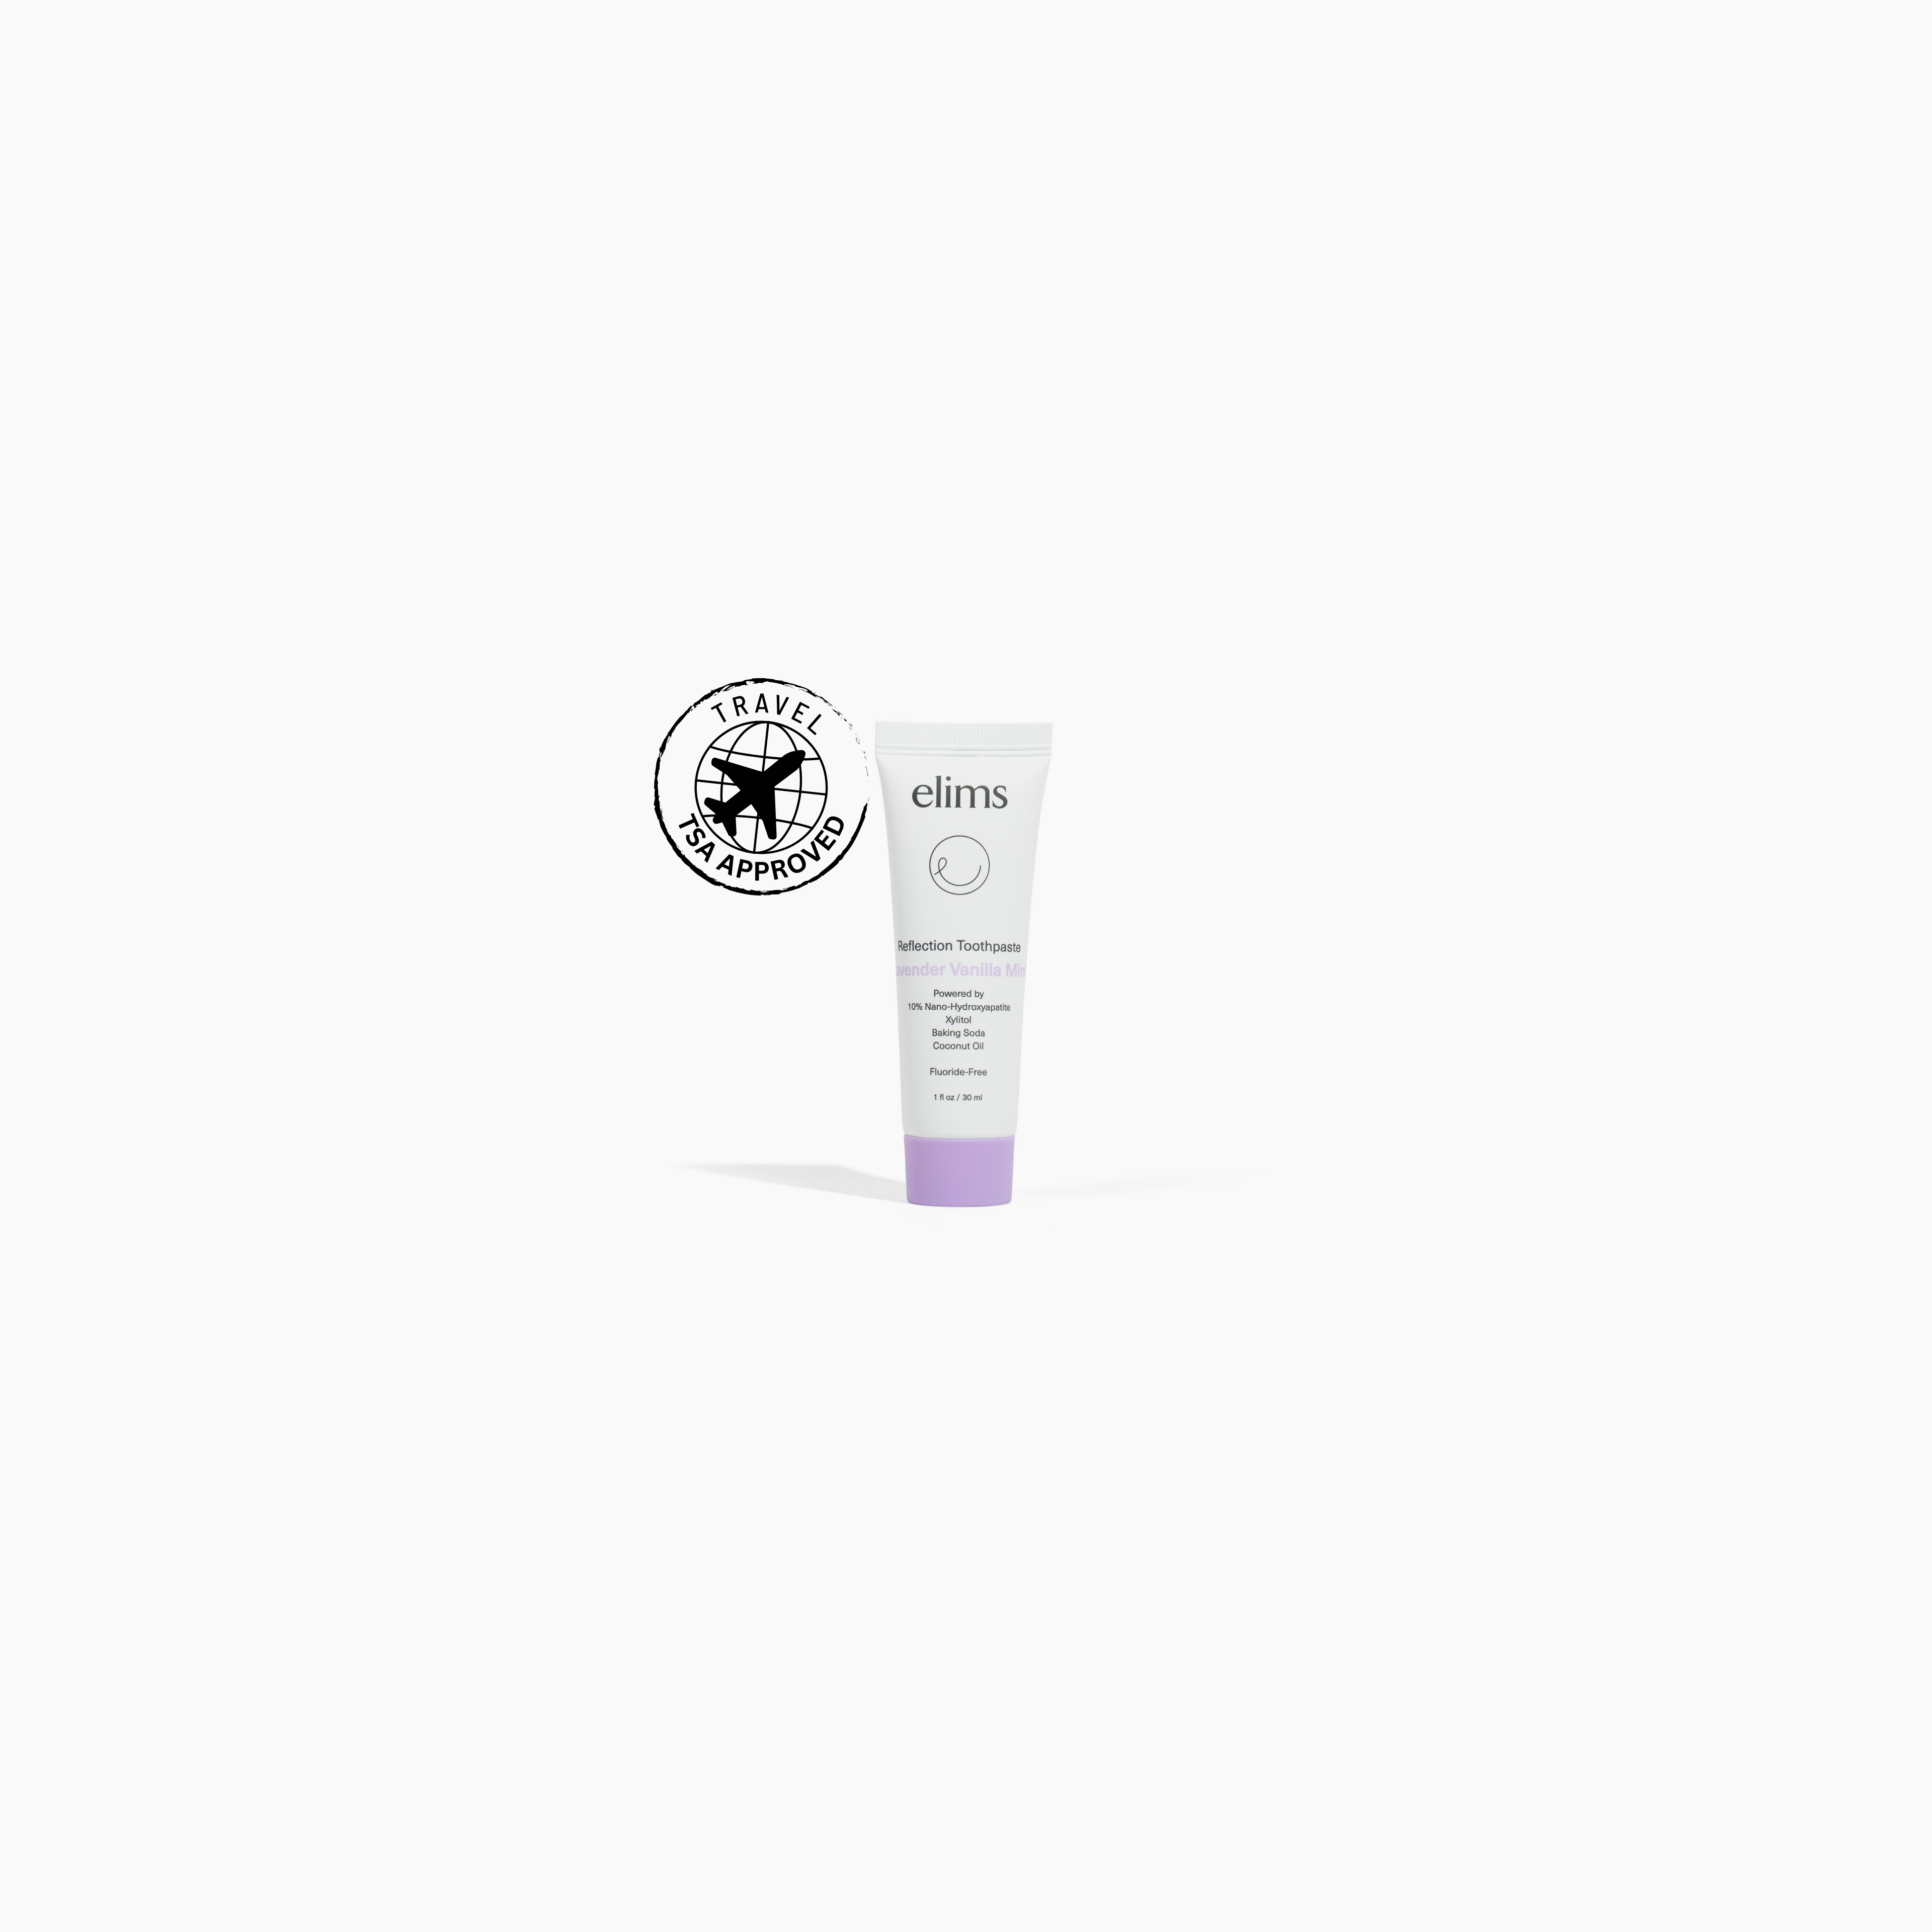 Travel Size Toothpaste in Lavender Vanilla Mint